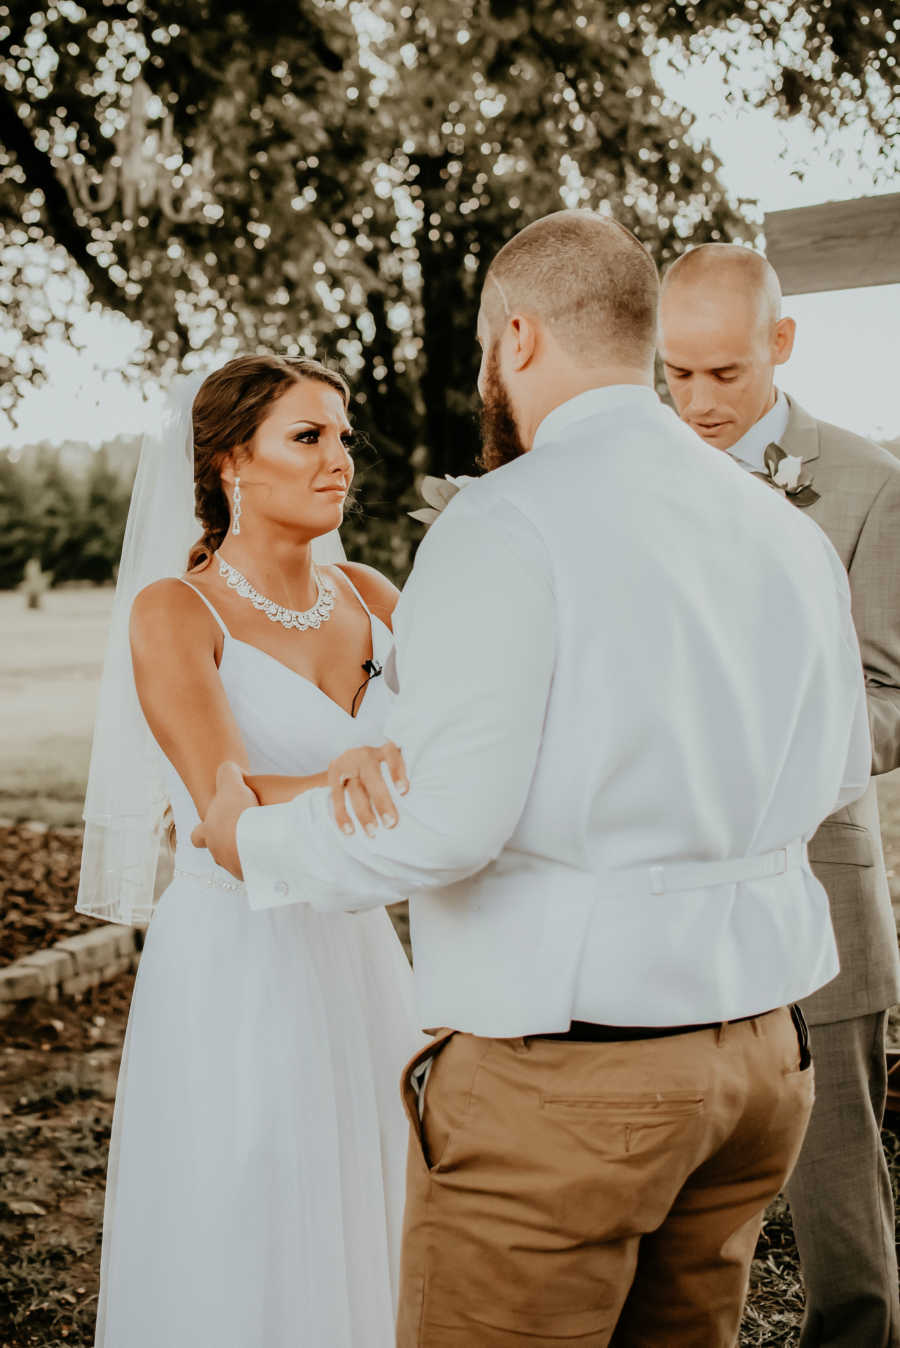 Paralyzed bride cries as she holds on to man's arms